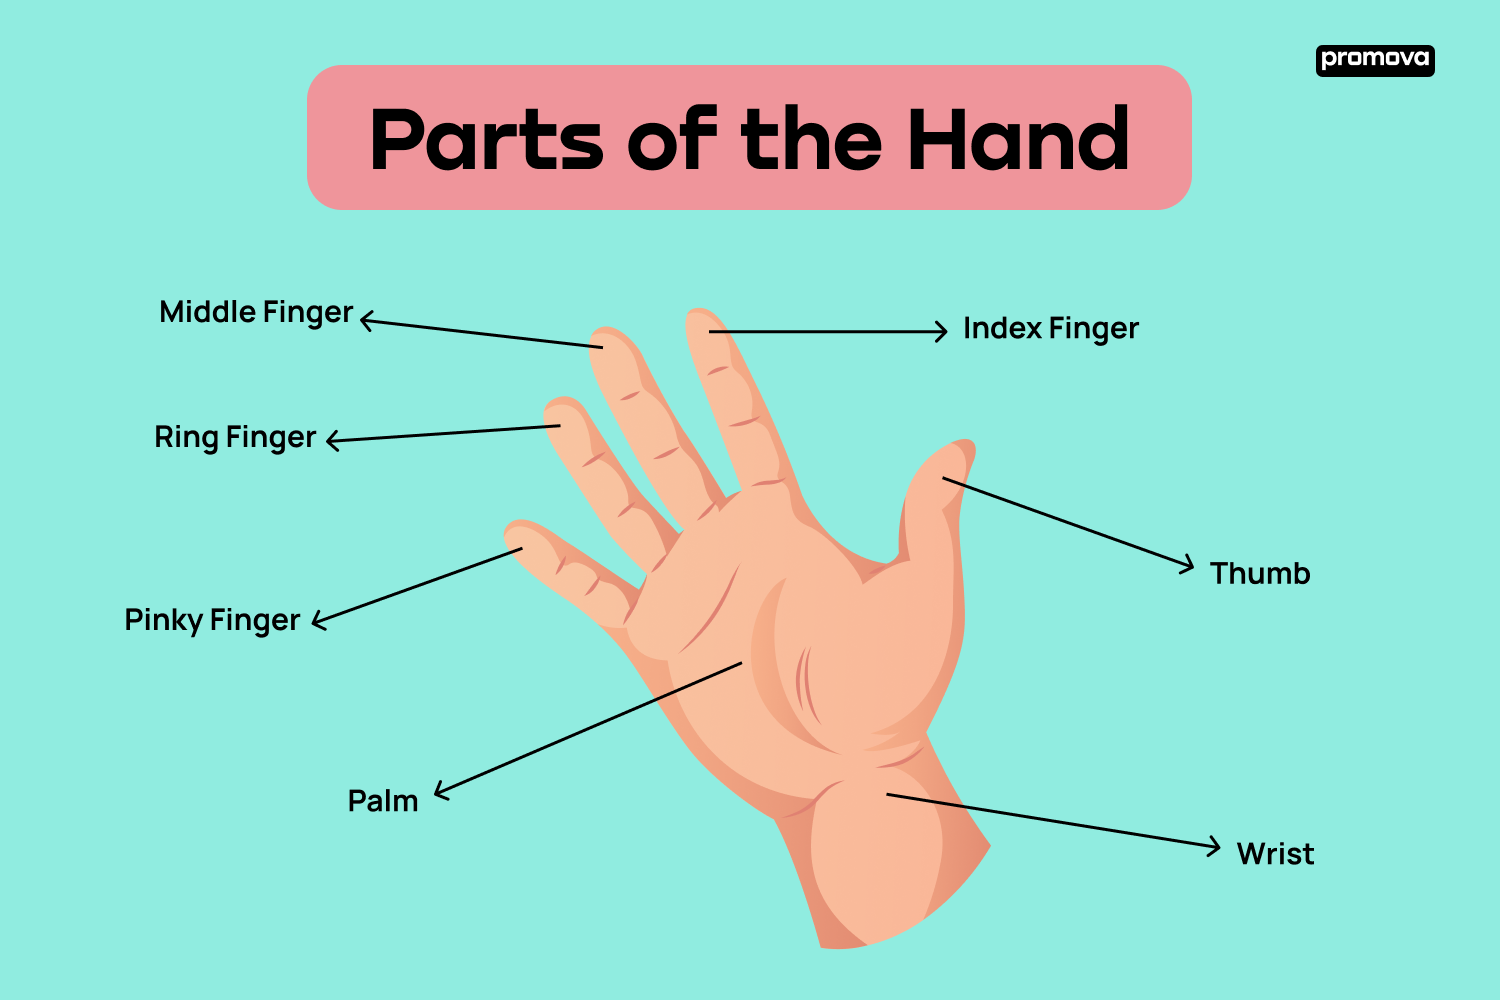 Precision in Anatomy: Vocabulary Guide for Parts of the Hand